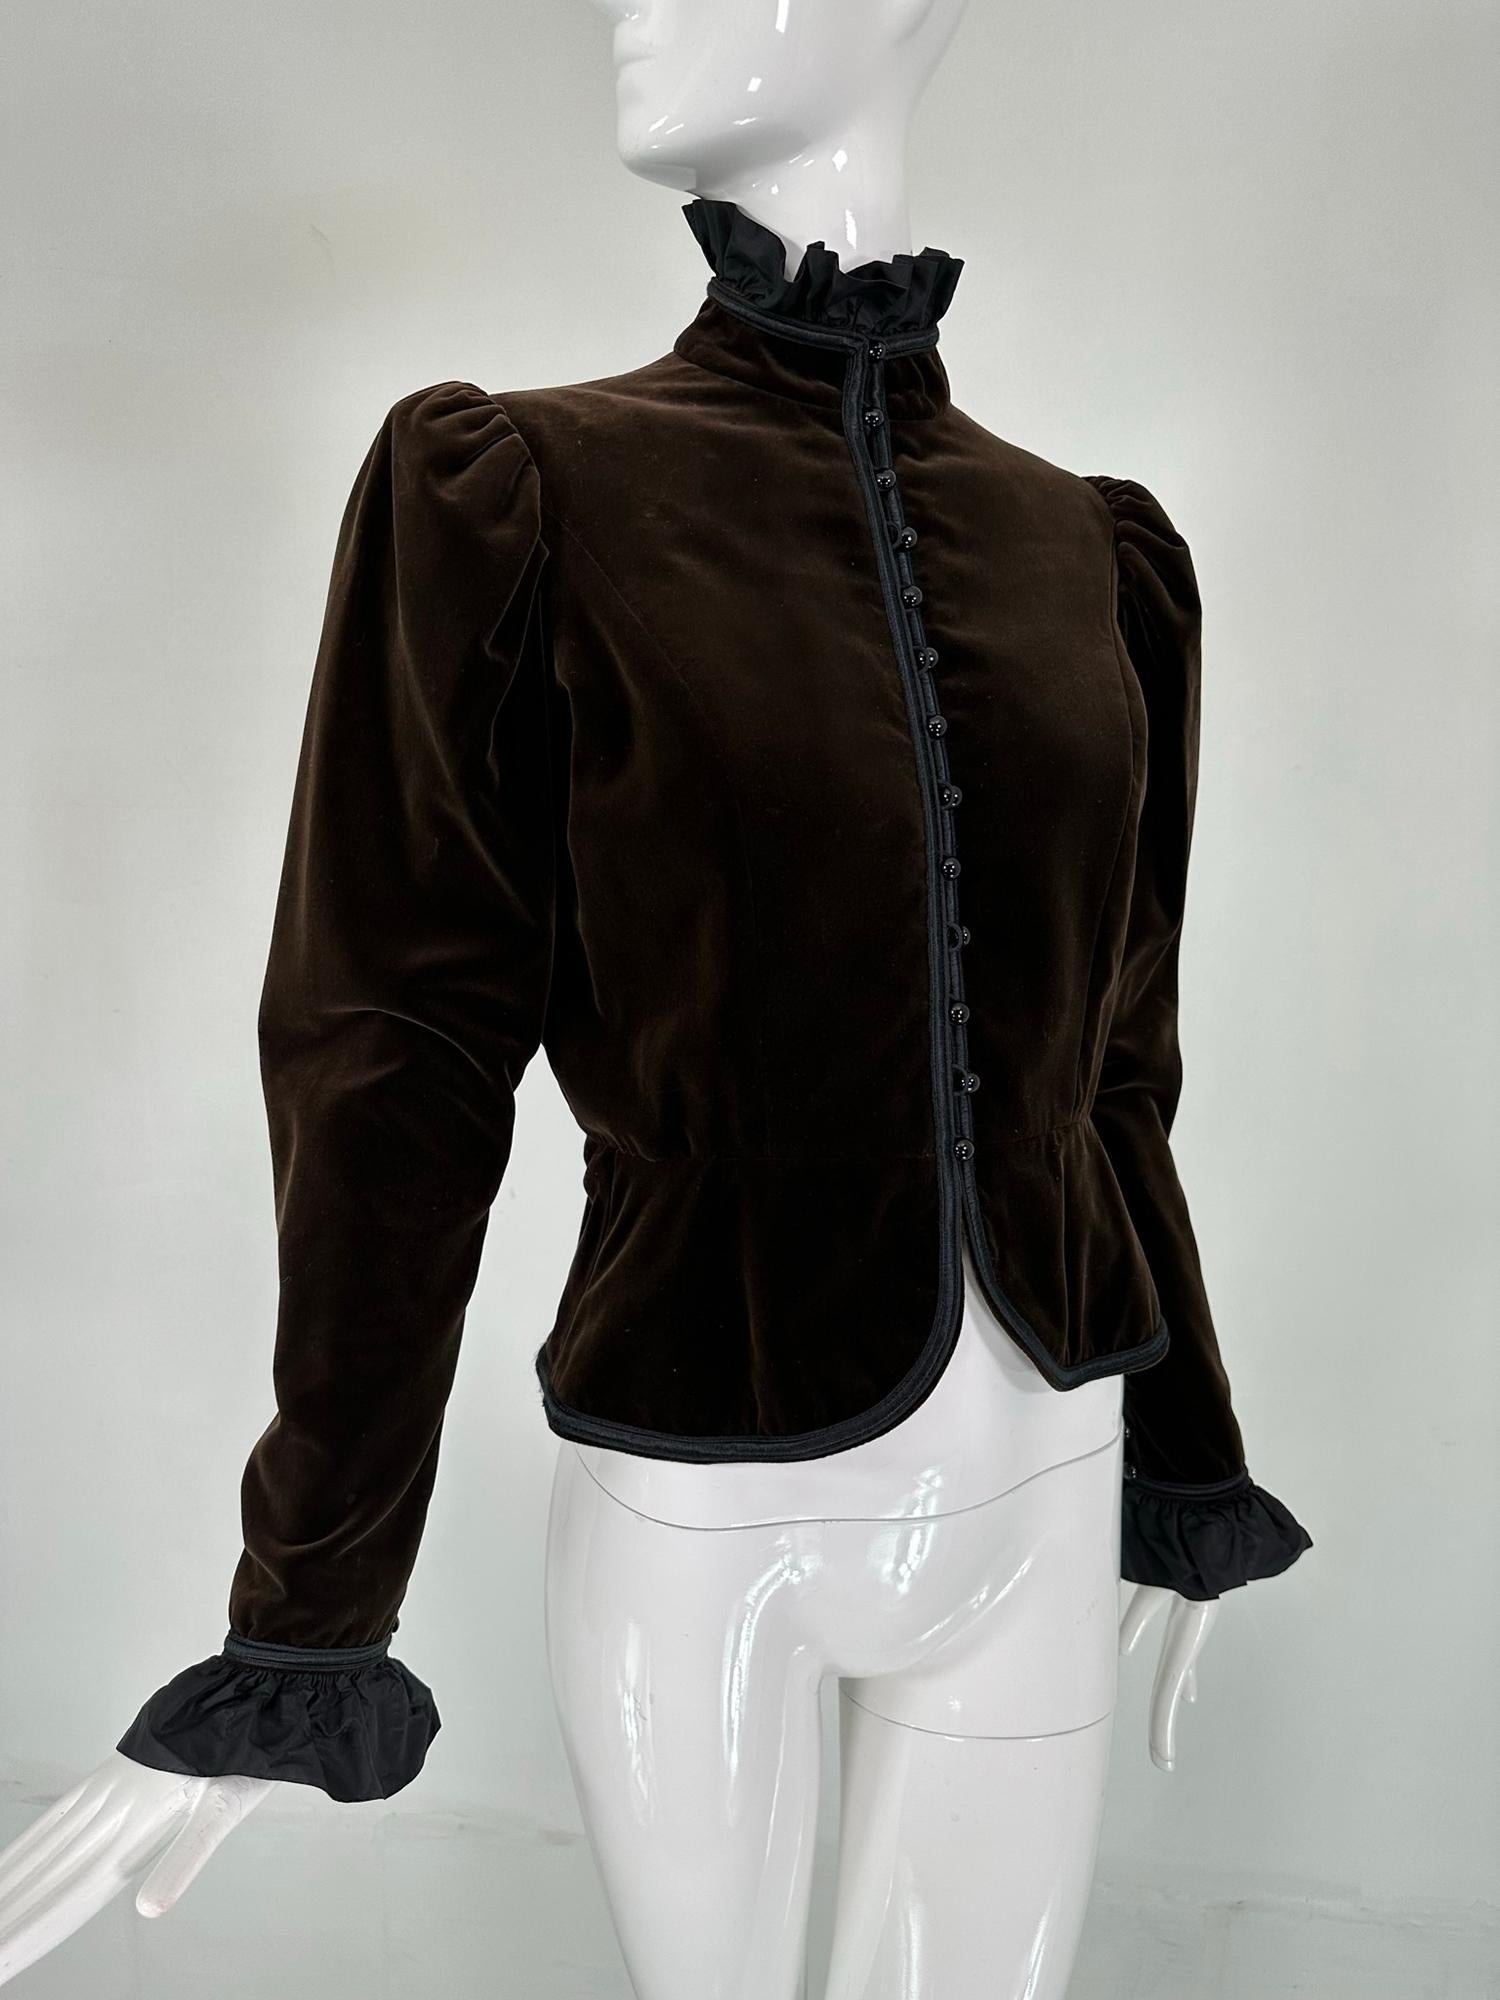 Yves Saint Laurent Rive Gauche chocolate brown velvet, Victorian style jacket from 1971-72. Beautiful velveteen jacket with a high neck black silk taffeta neck & cuffs. Long sleeves have have full puff shoulders that taper to the button wrists &